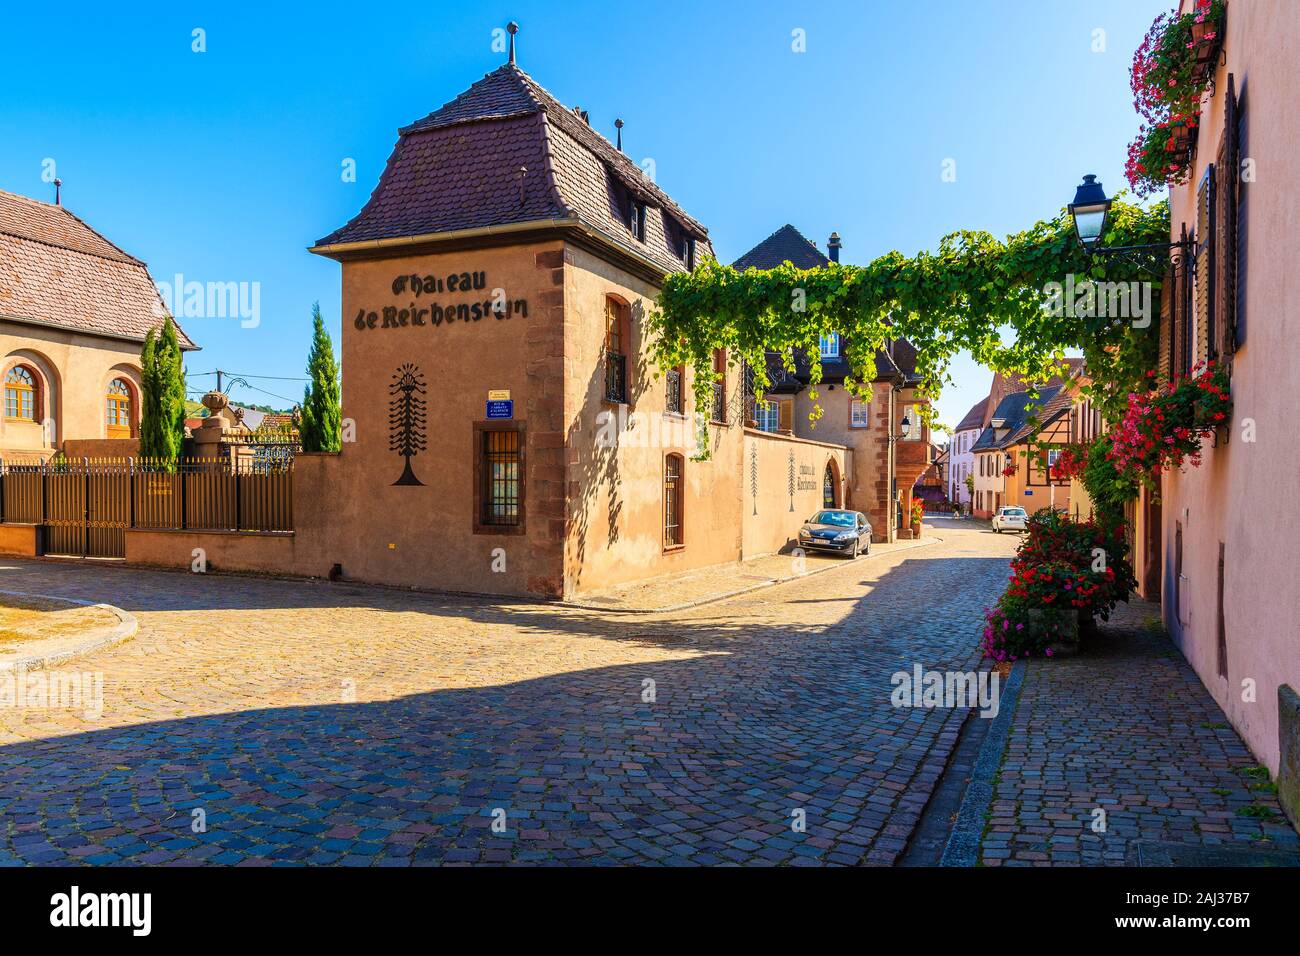 ALSACE WINE REGION, FRANCE - SEP 20, 2019: Street with typical houses in Kaysersberg picturesque village which is located on Alsatian Wine Route, Fran Stock Photo